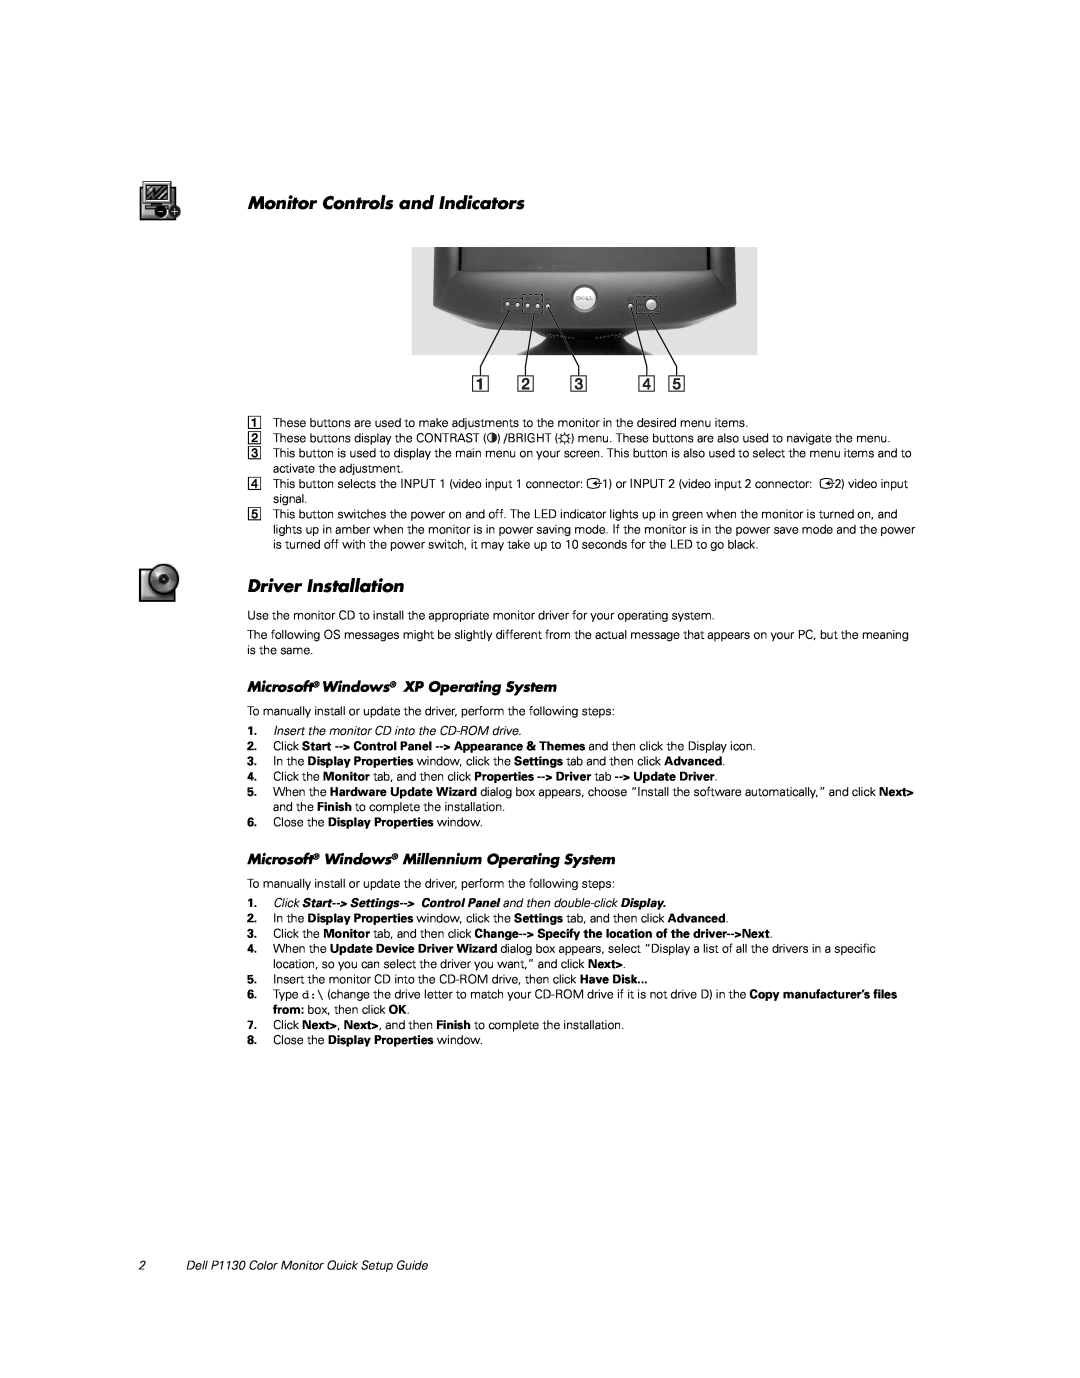 Dell P1130 specifications Monitor Controls and Indicators, Driver Installation, Microsoft Windows XP Operating System 